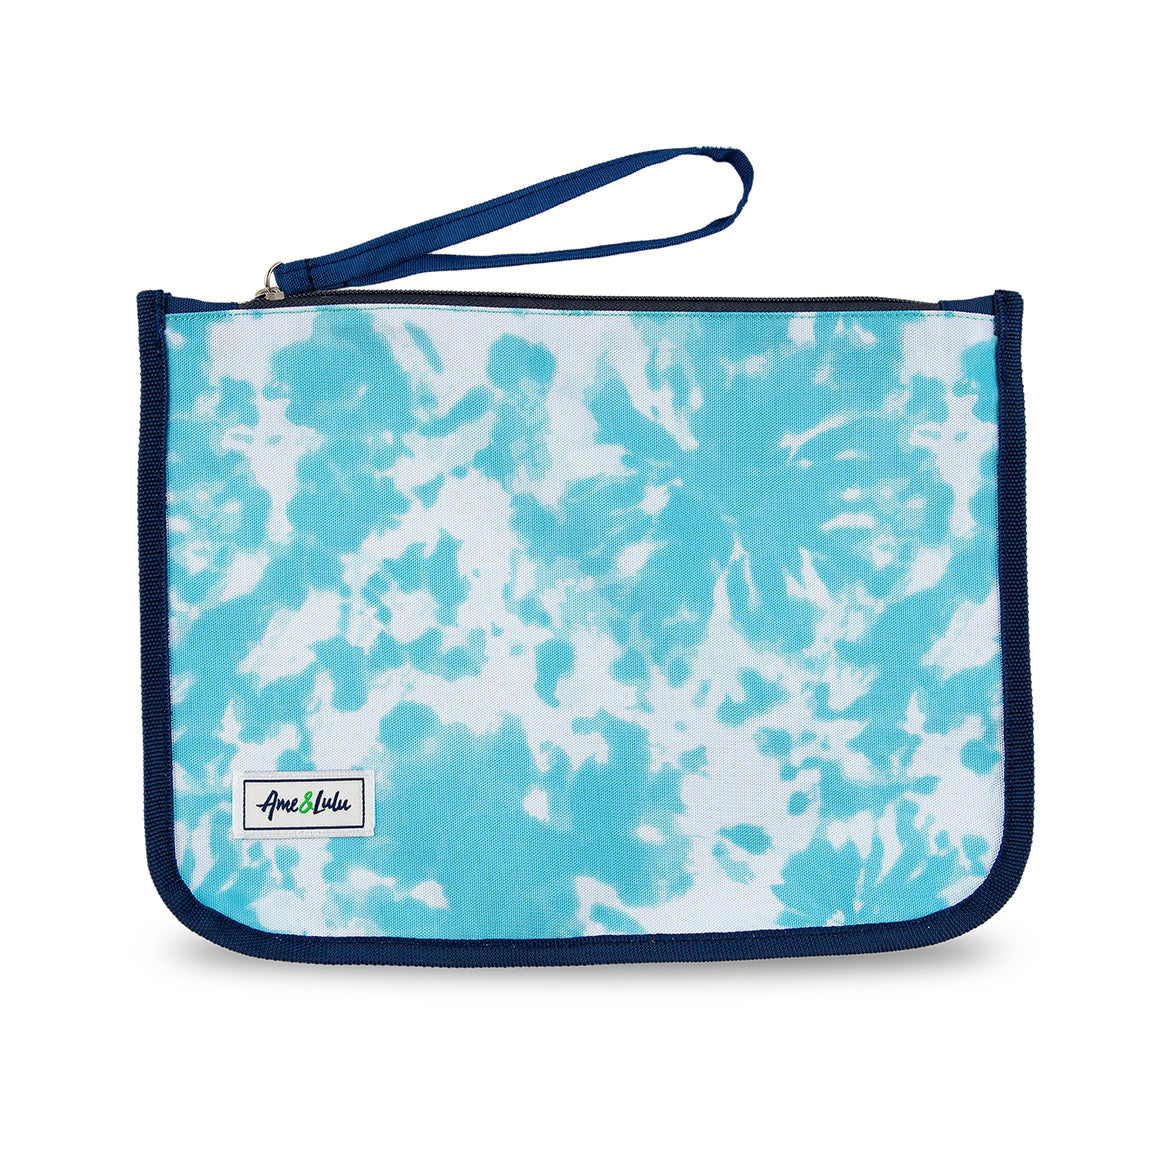 light blue and white tie dye nylon zip pouch with wrist strap